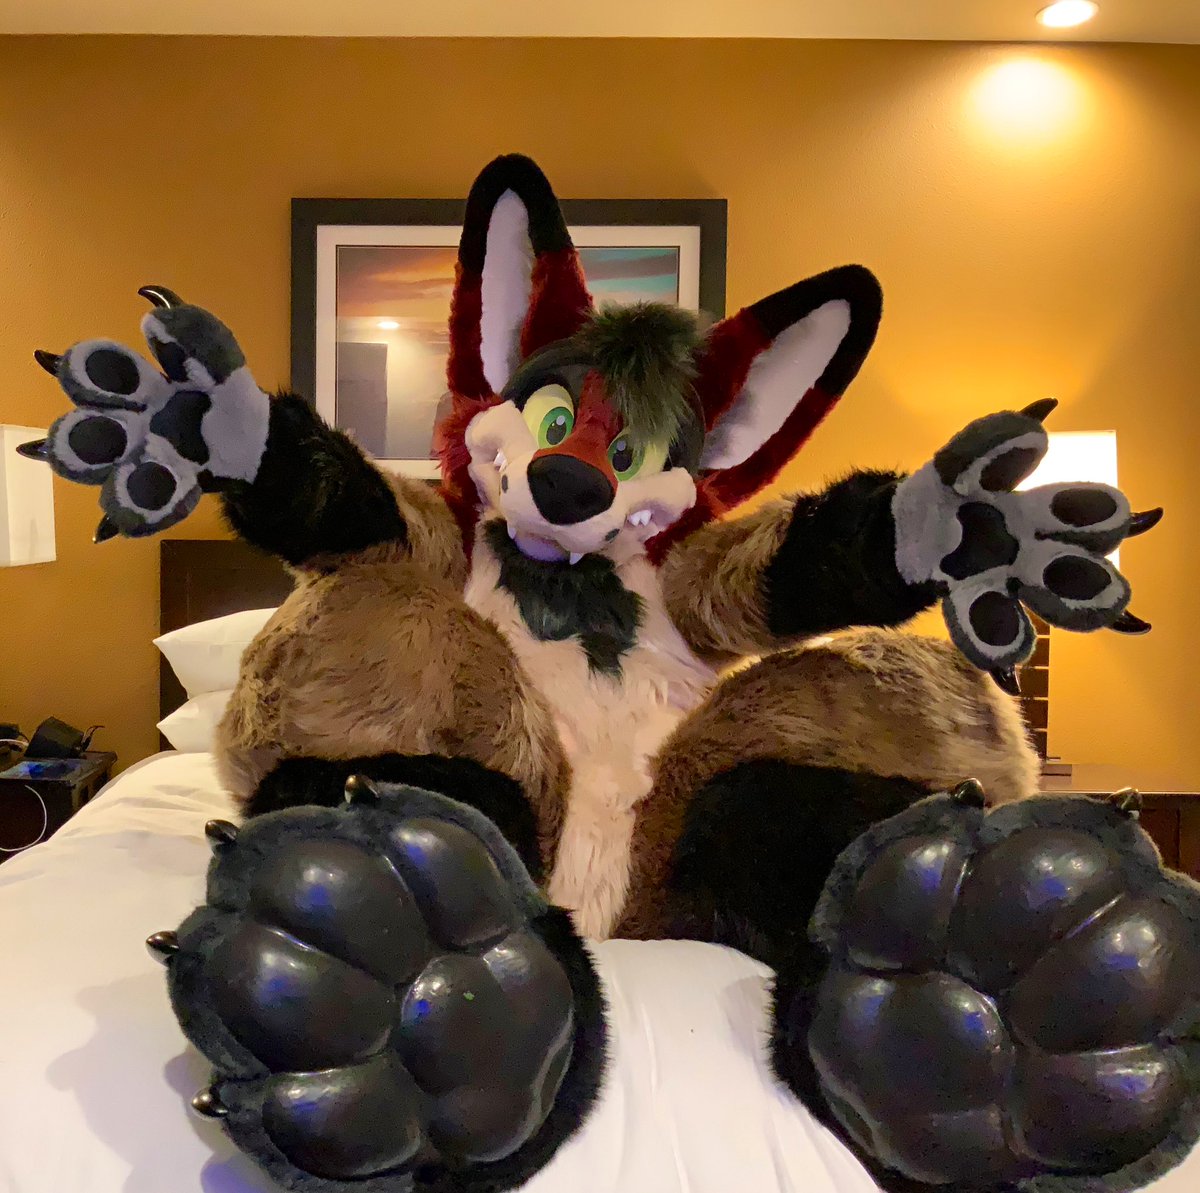 Yotes are preparing for tests so here’s a deceptively adorable picture for #morefurlessminday. We aren’t sly tricksters… no not at all… get that thought out of your head!

🐕 @MoreFurLess